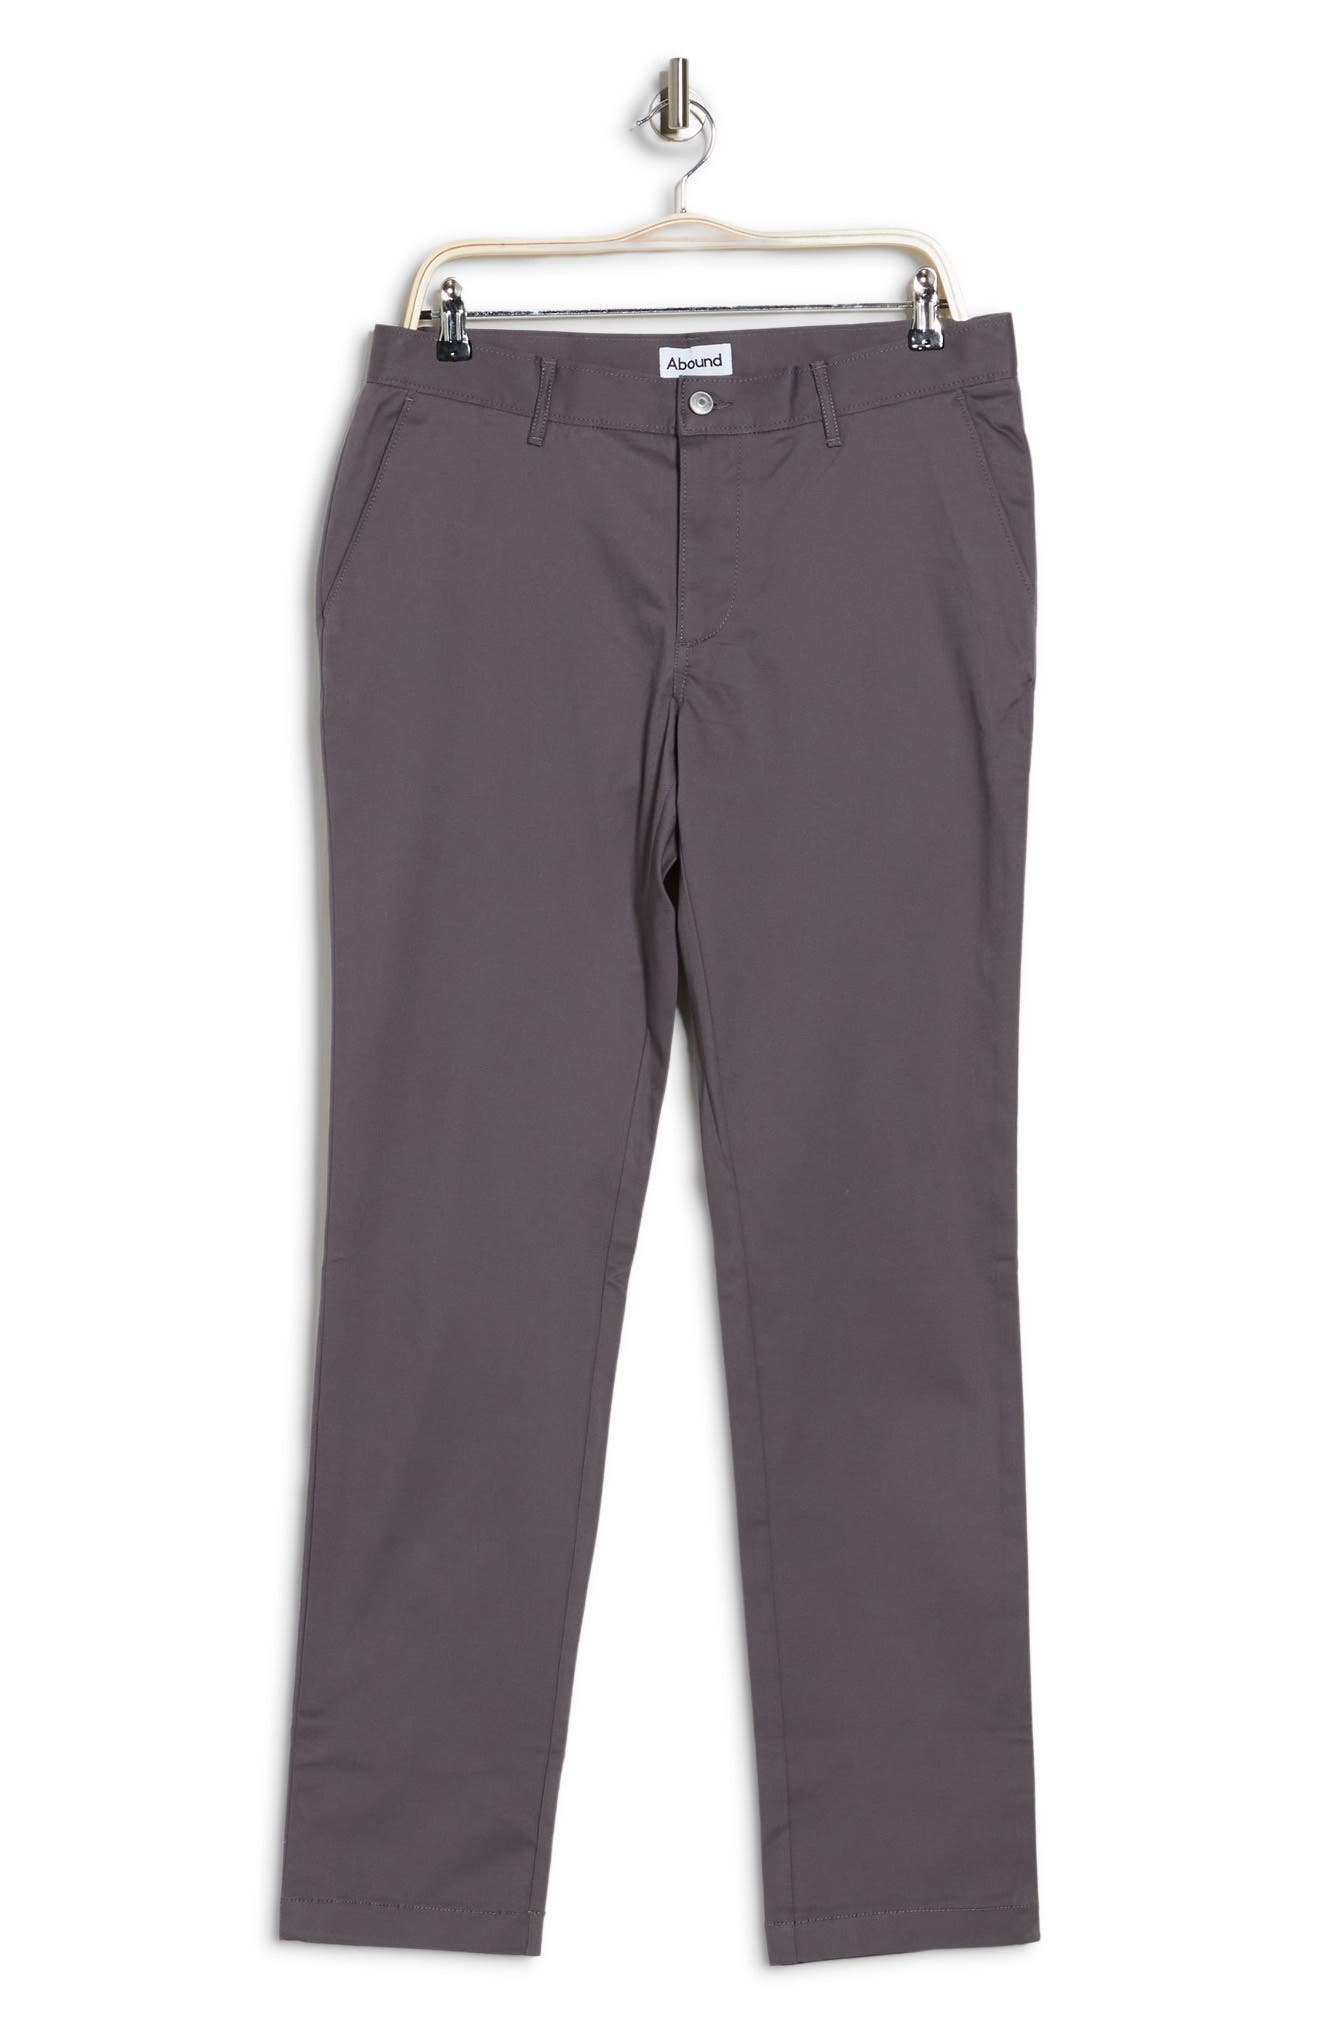 Abound Solid Workwear Chino Pants In Grey Tornado